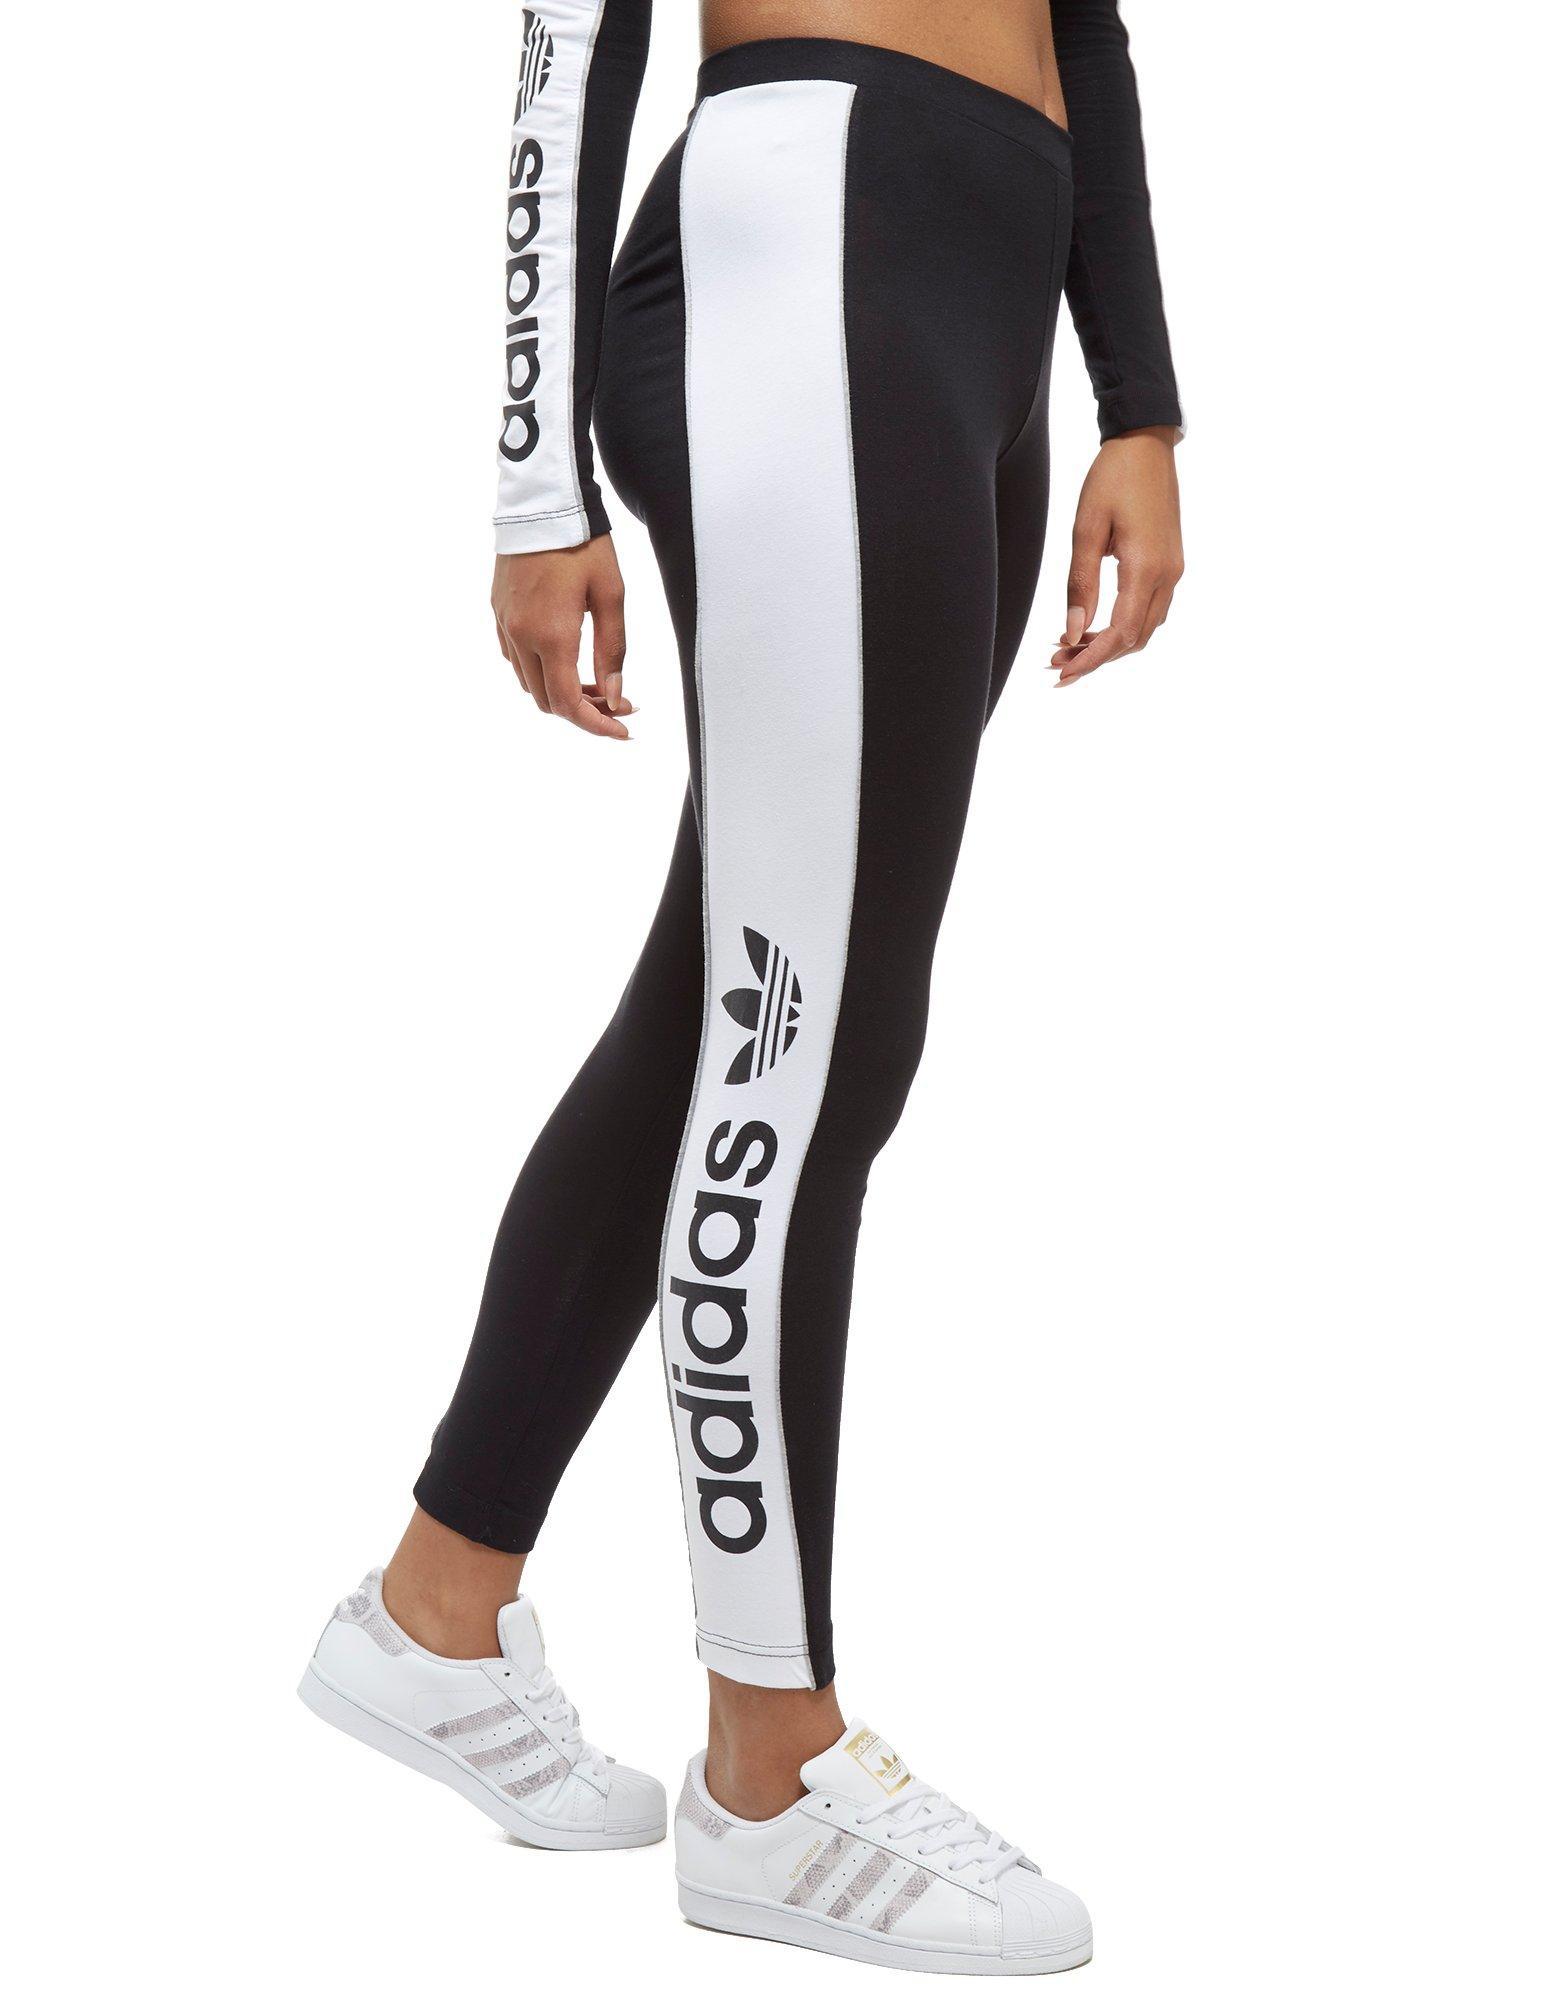 adidas black and white tights